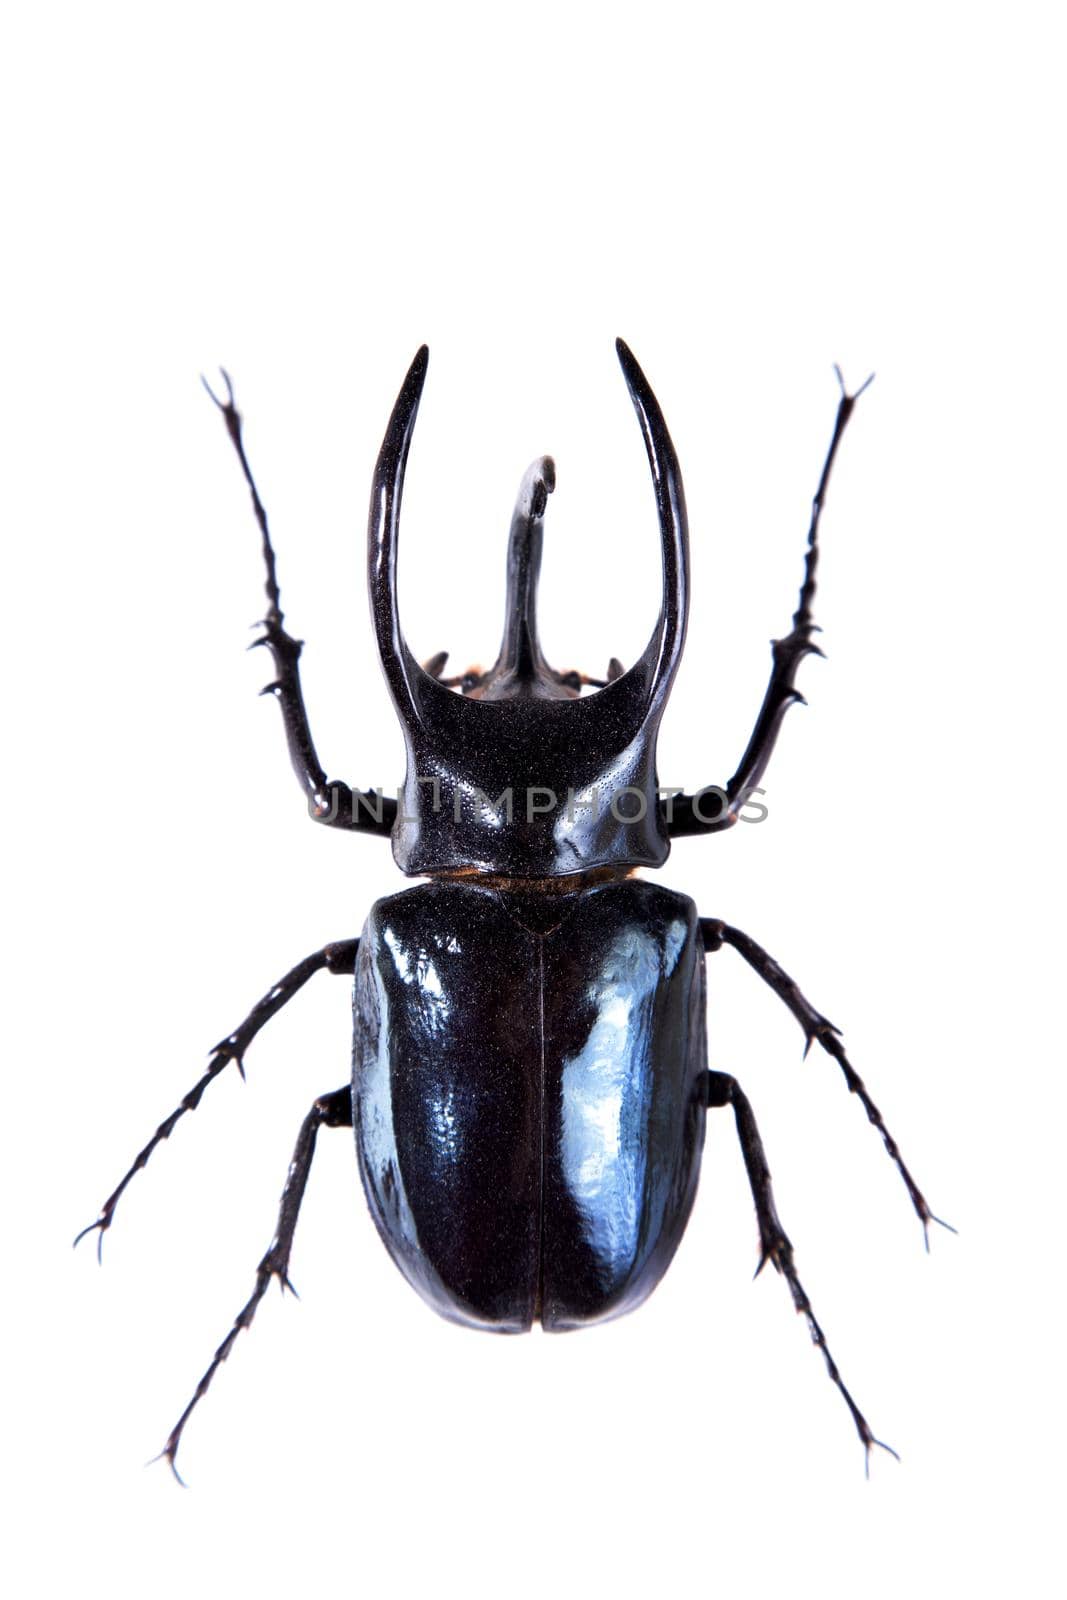 The five-horned beetle in museum isolated on the white background